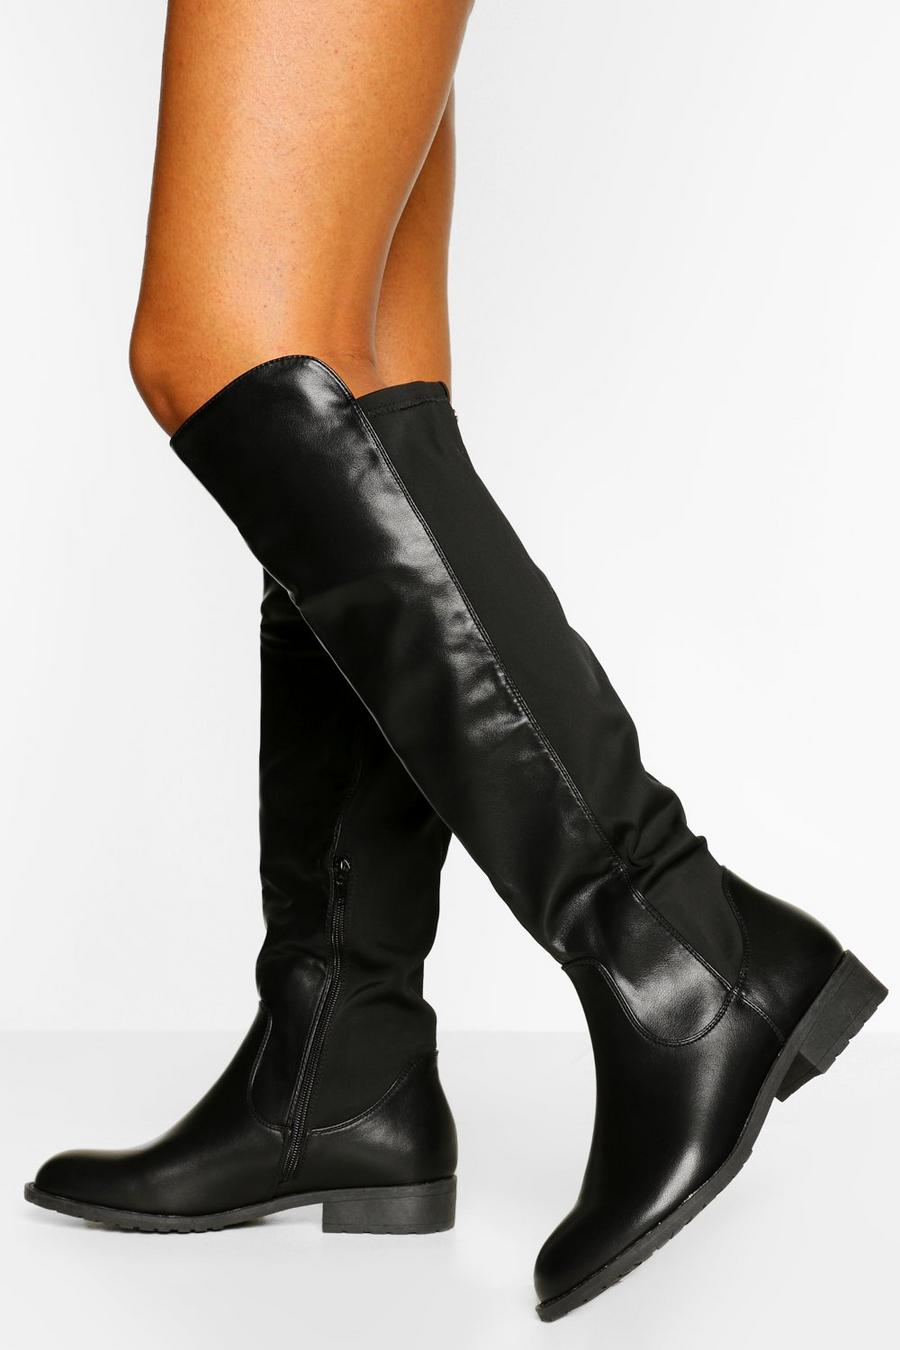 Black Wider Calf Knee High Riding Boots image number 1